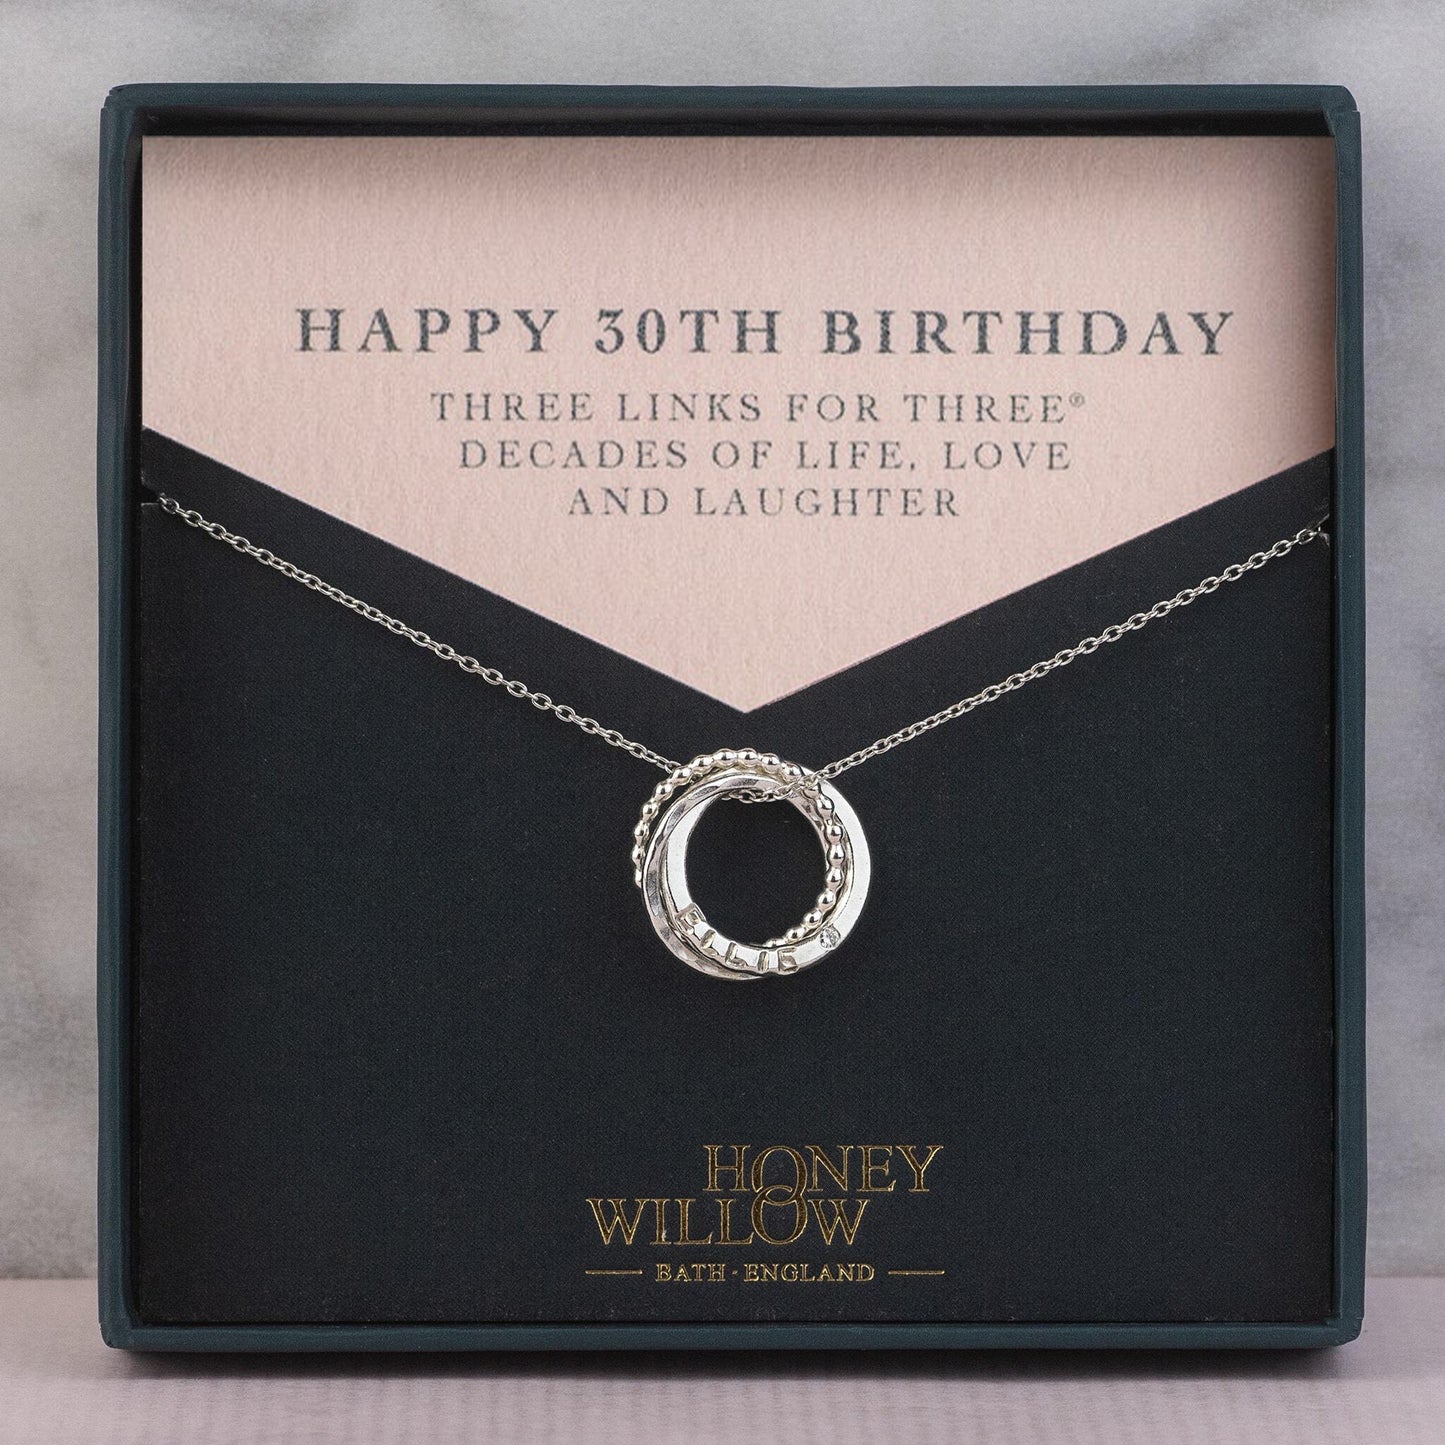 Personalised 30th Birthday Birthstone Necklace - Hand-Stamped - The Original 3 Links for 3 Decades Necklace - Silver